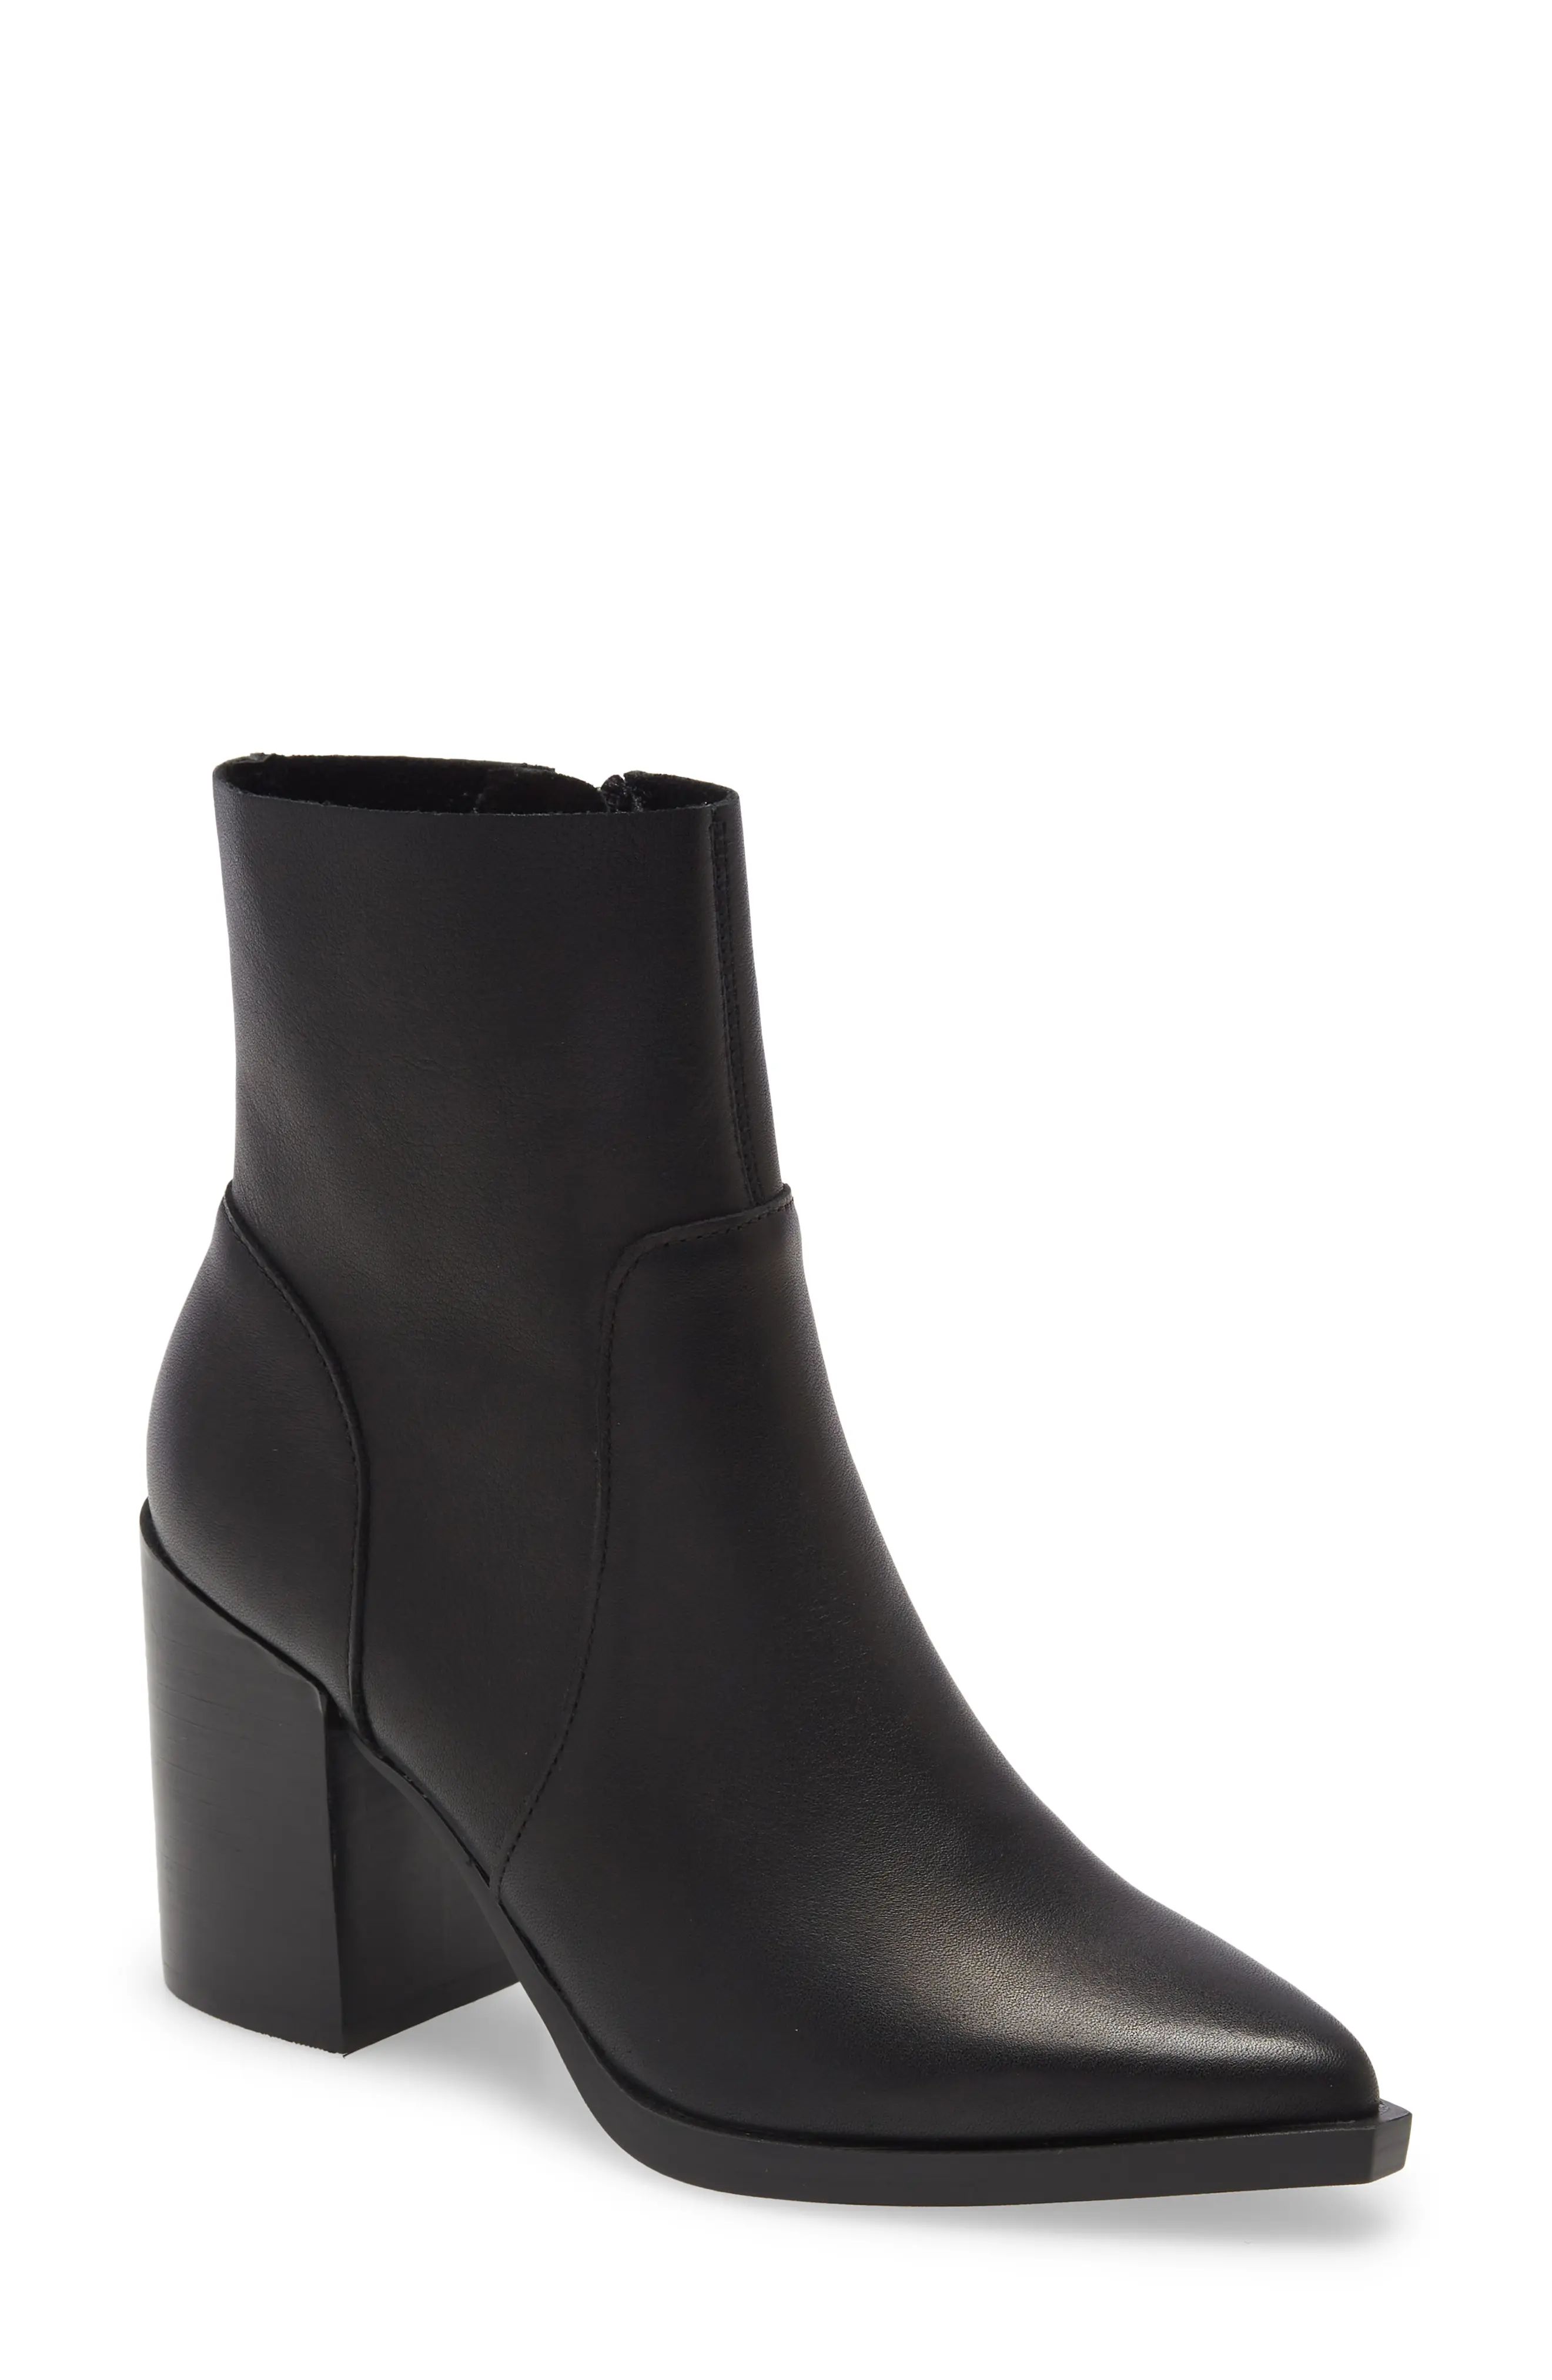 Steve Madden Calabria Pointed Toe Bootie in Black Leat at Nordstrom, Size 9.5 | Nordstrom